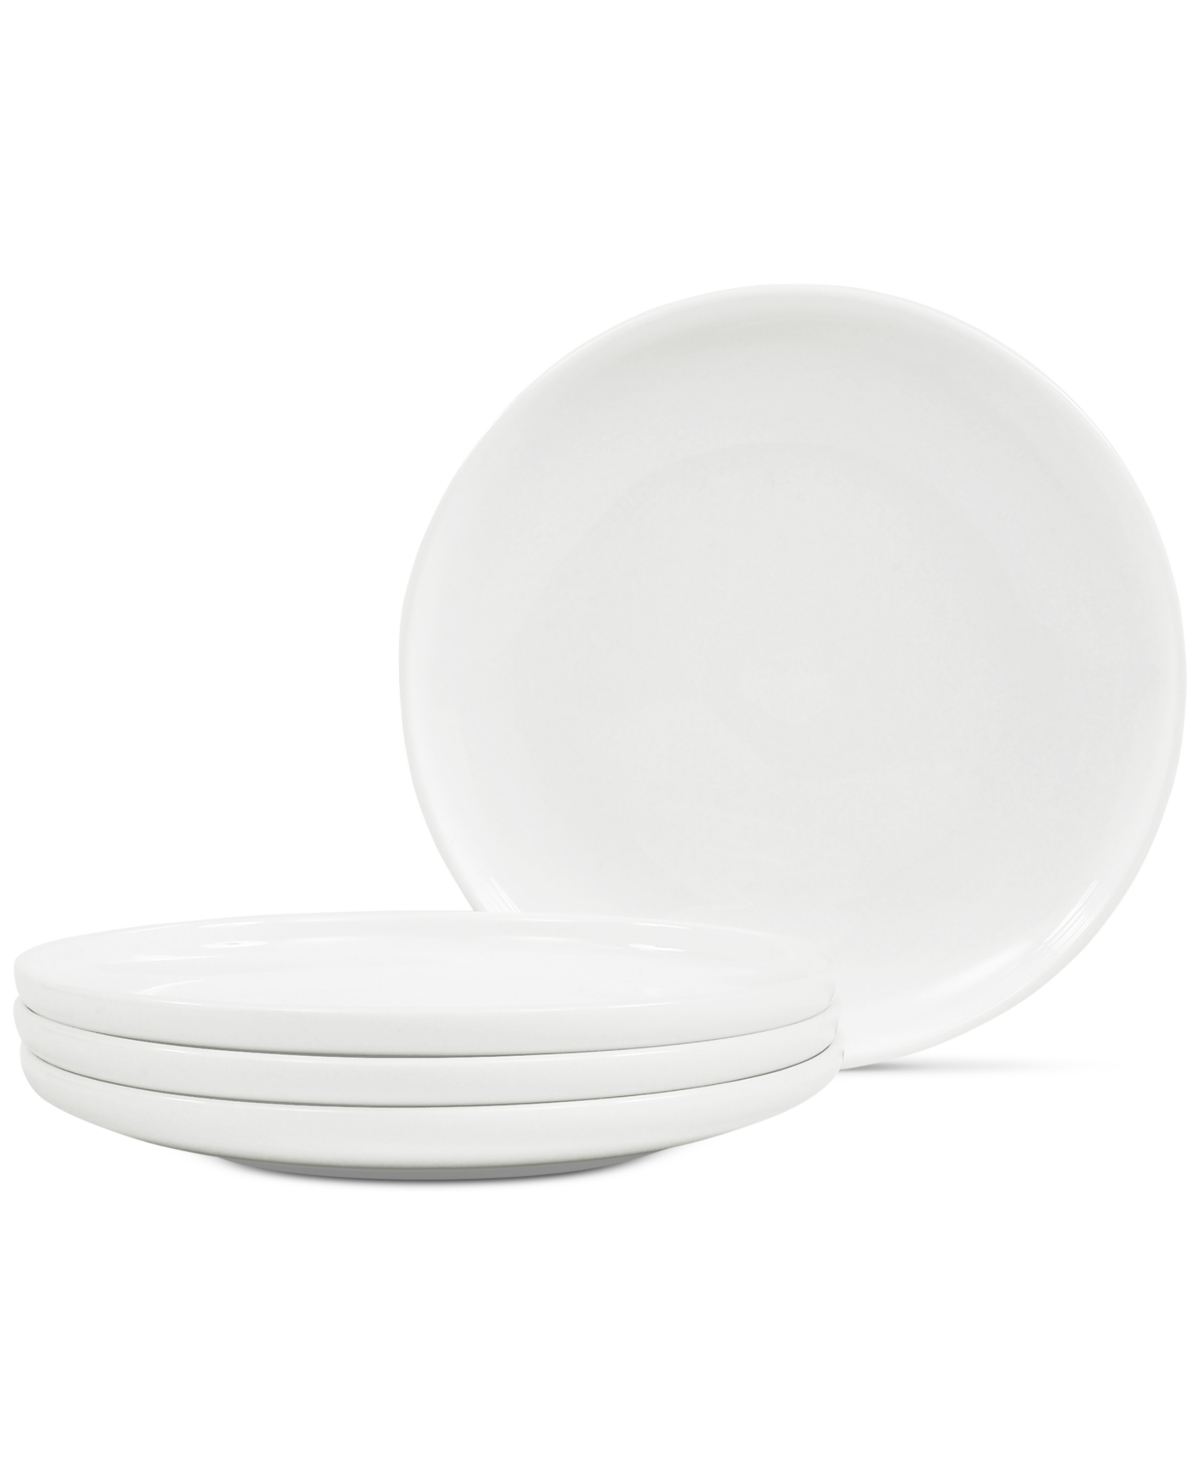 Marc Newson Bread & Butter Plates, Set of 4 - White